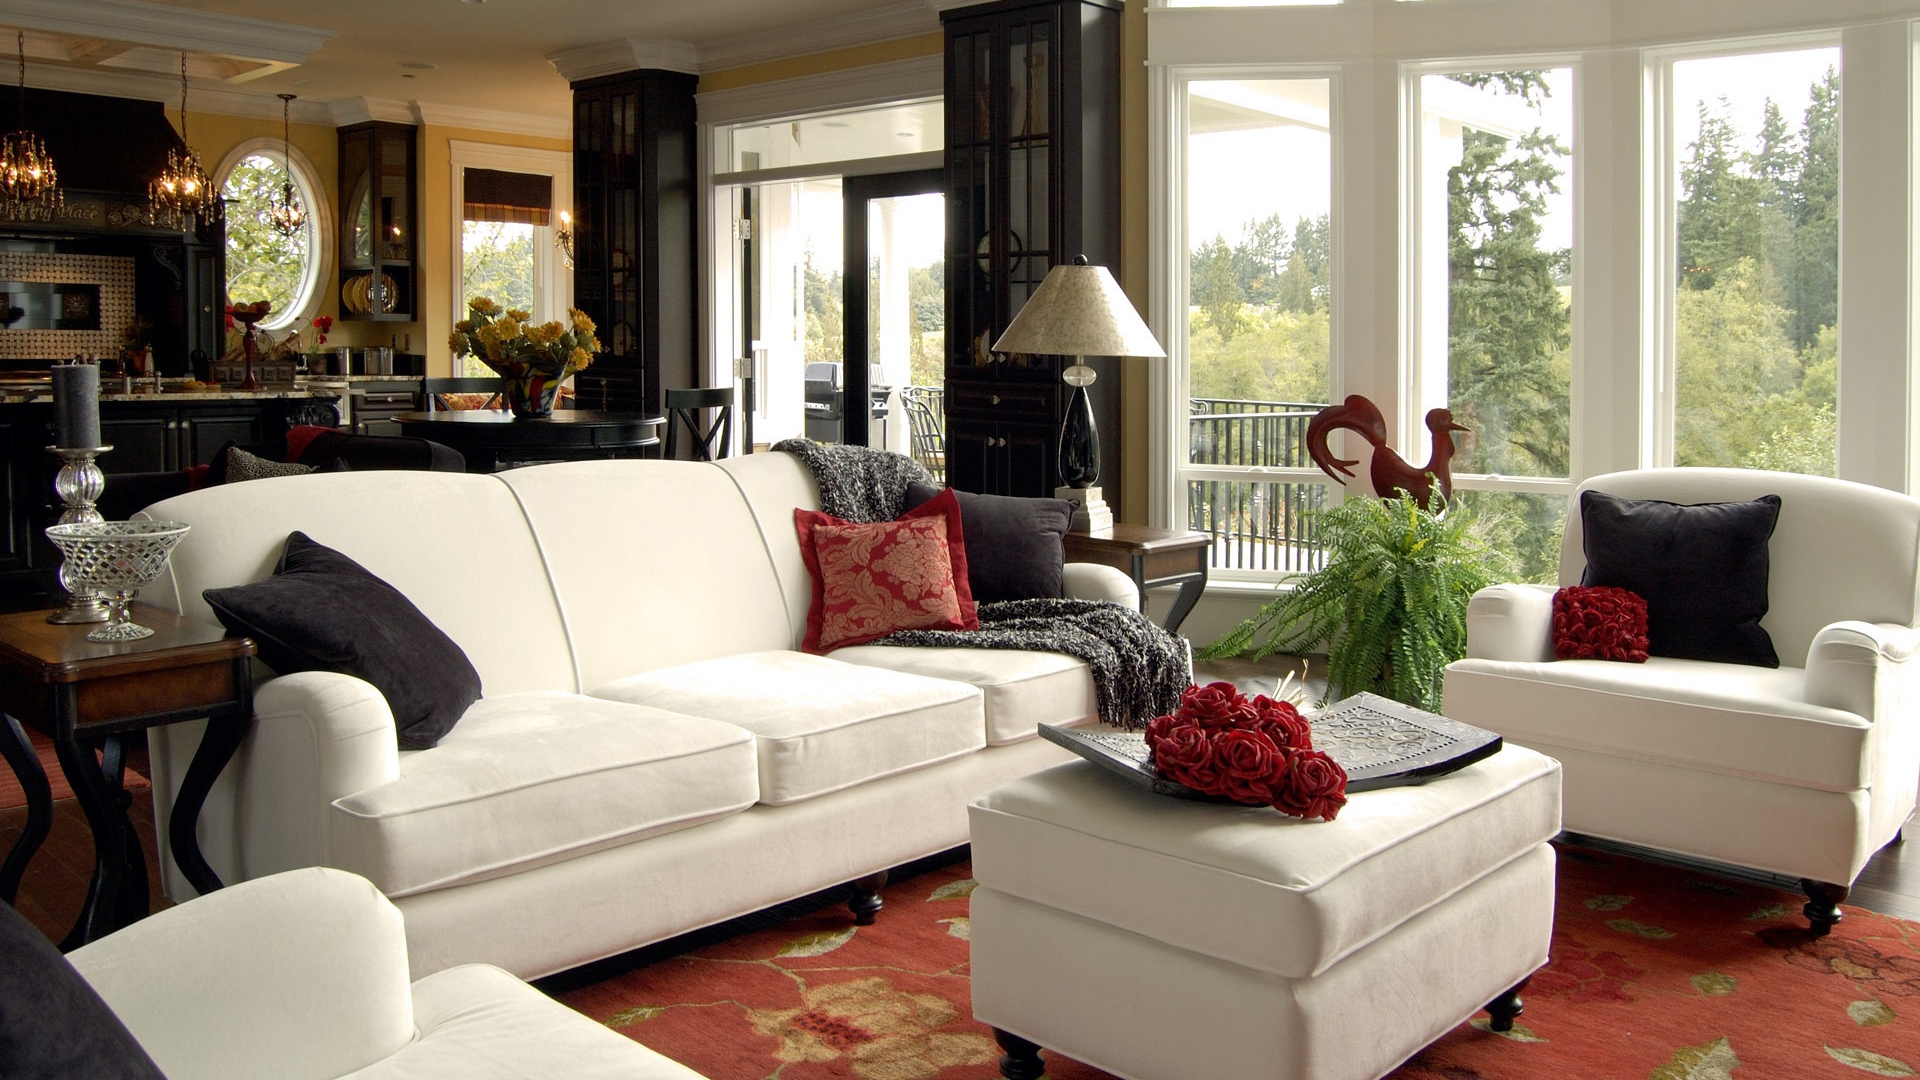 A living room with white furniture and red accents.